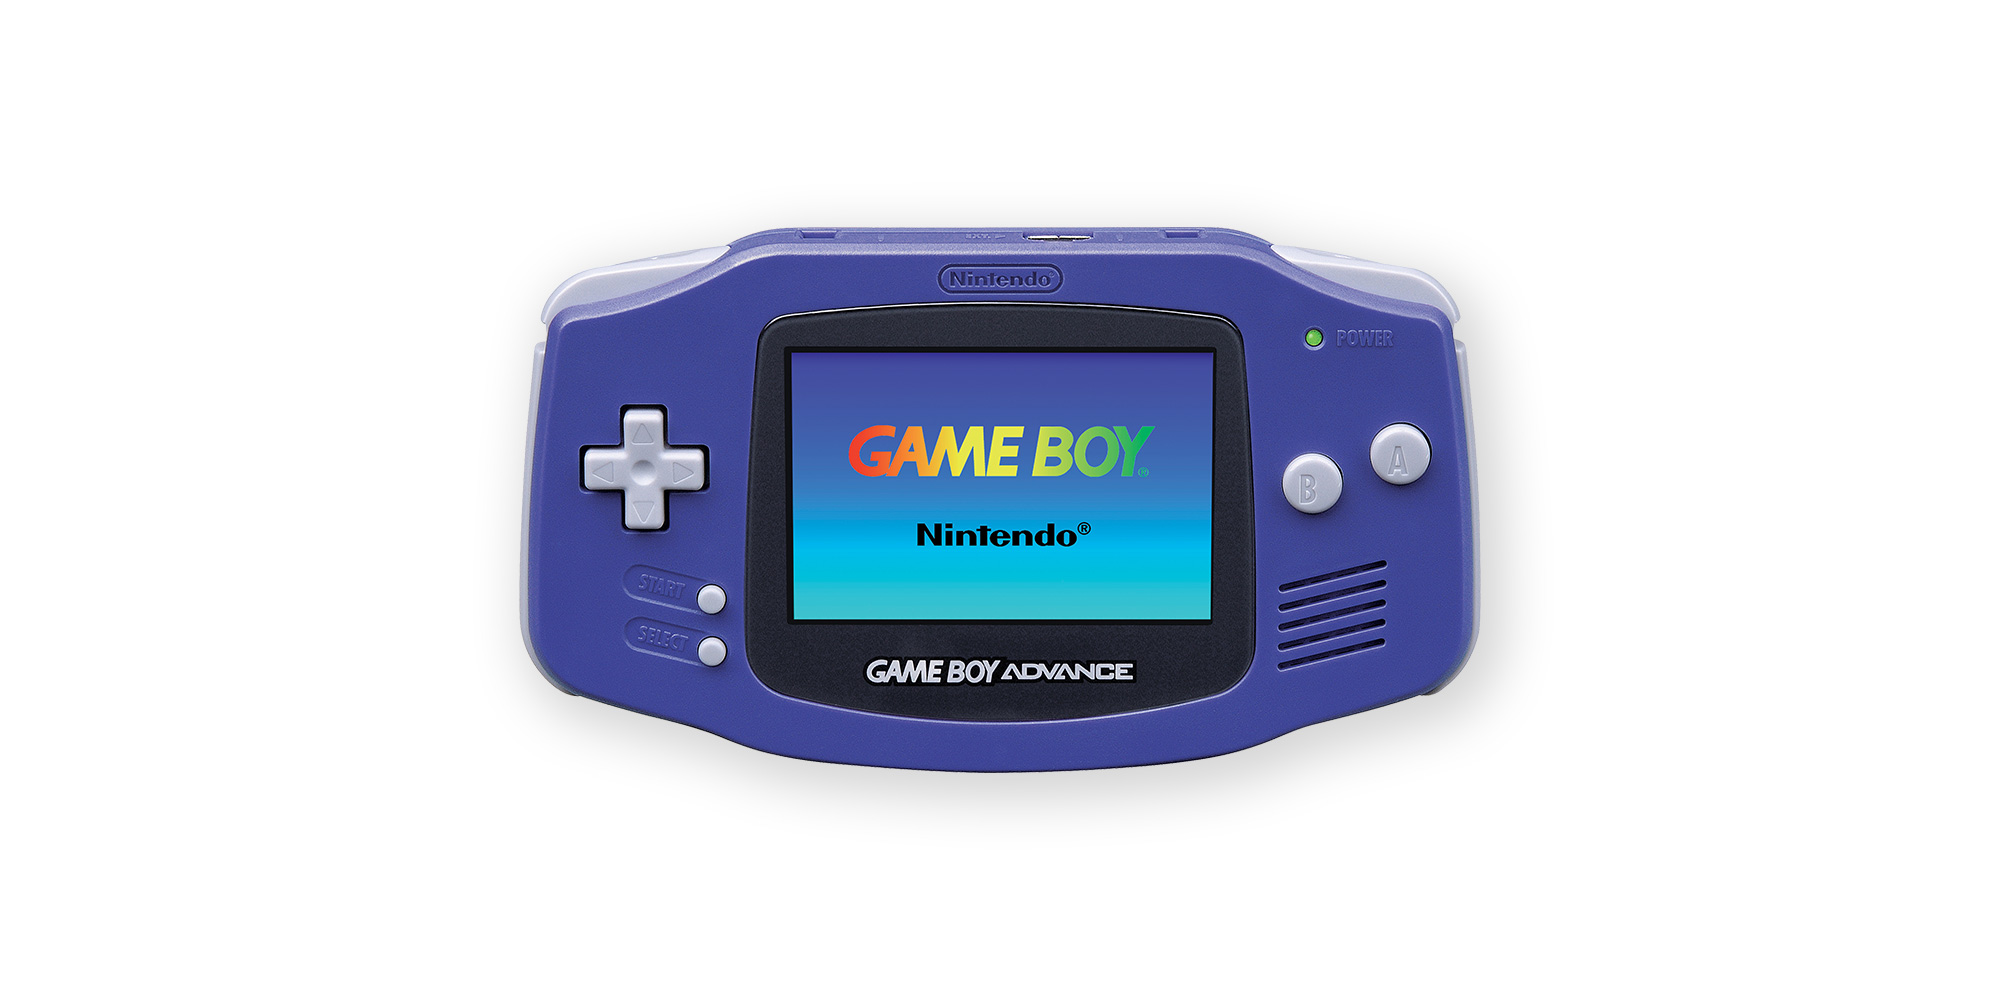 Support for Game Boy Advance.